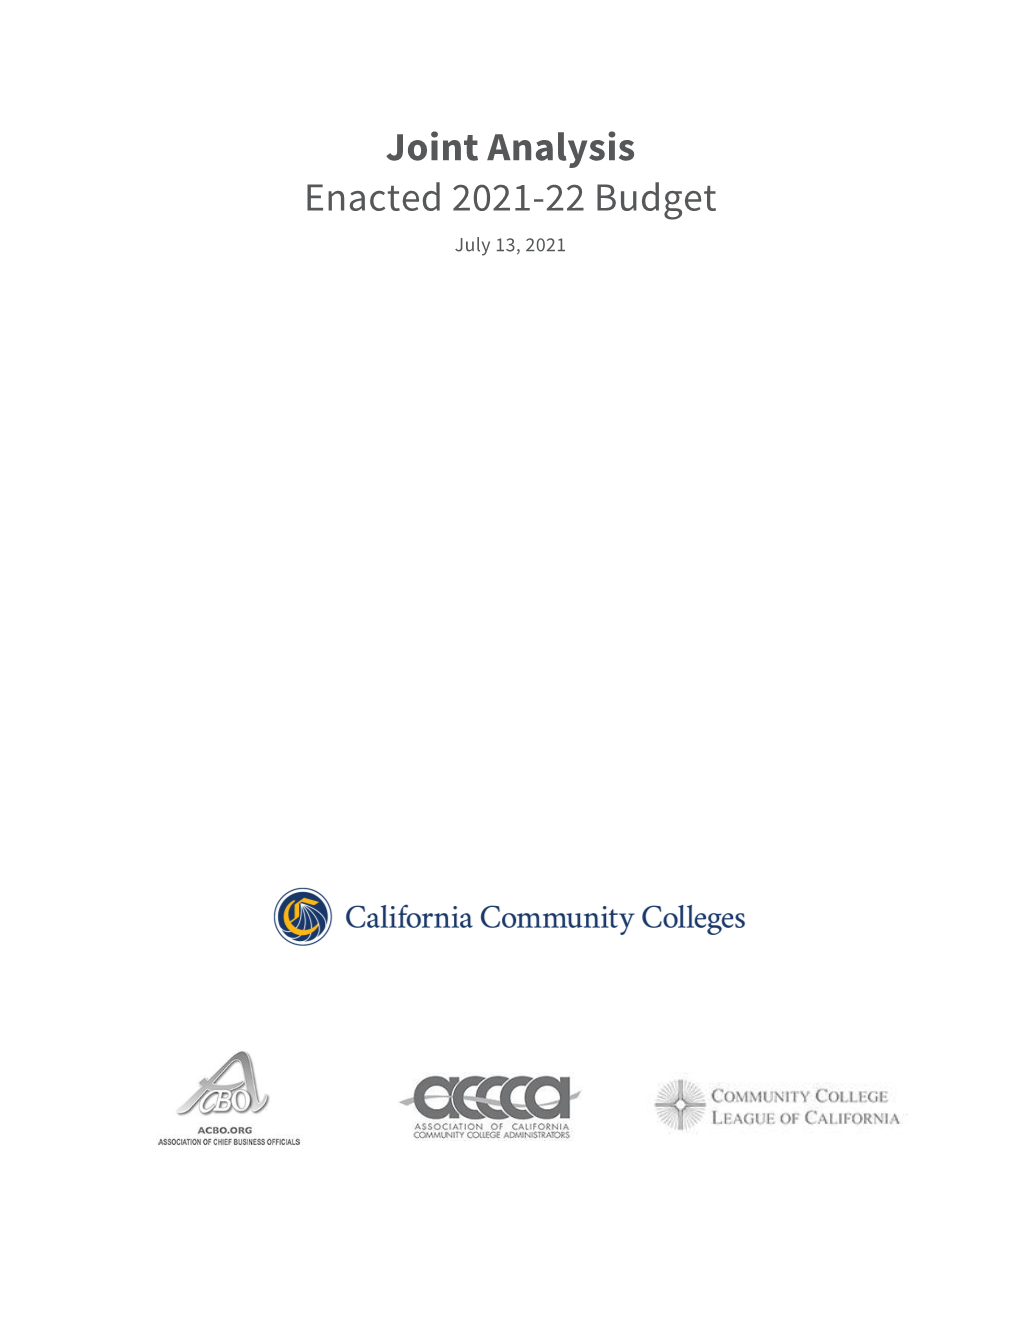 July 13, 2021: Joint Analysis Enacted 2021-22 Budget